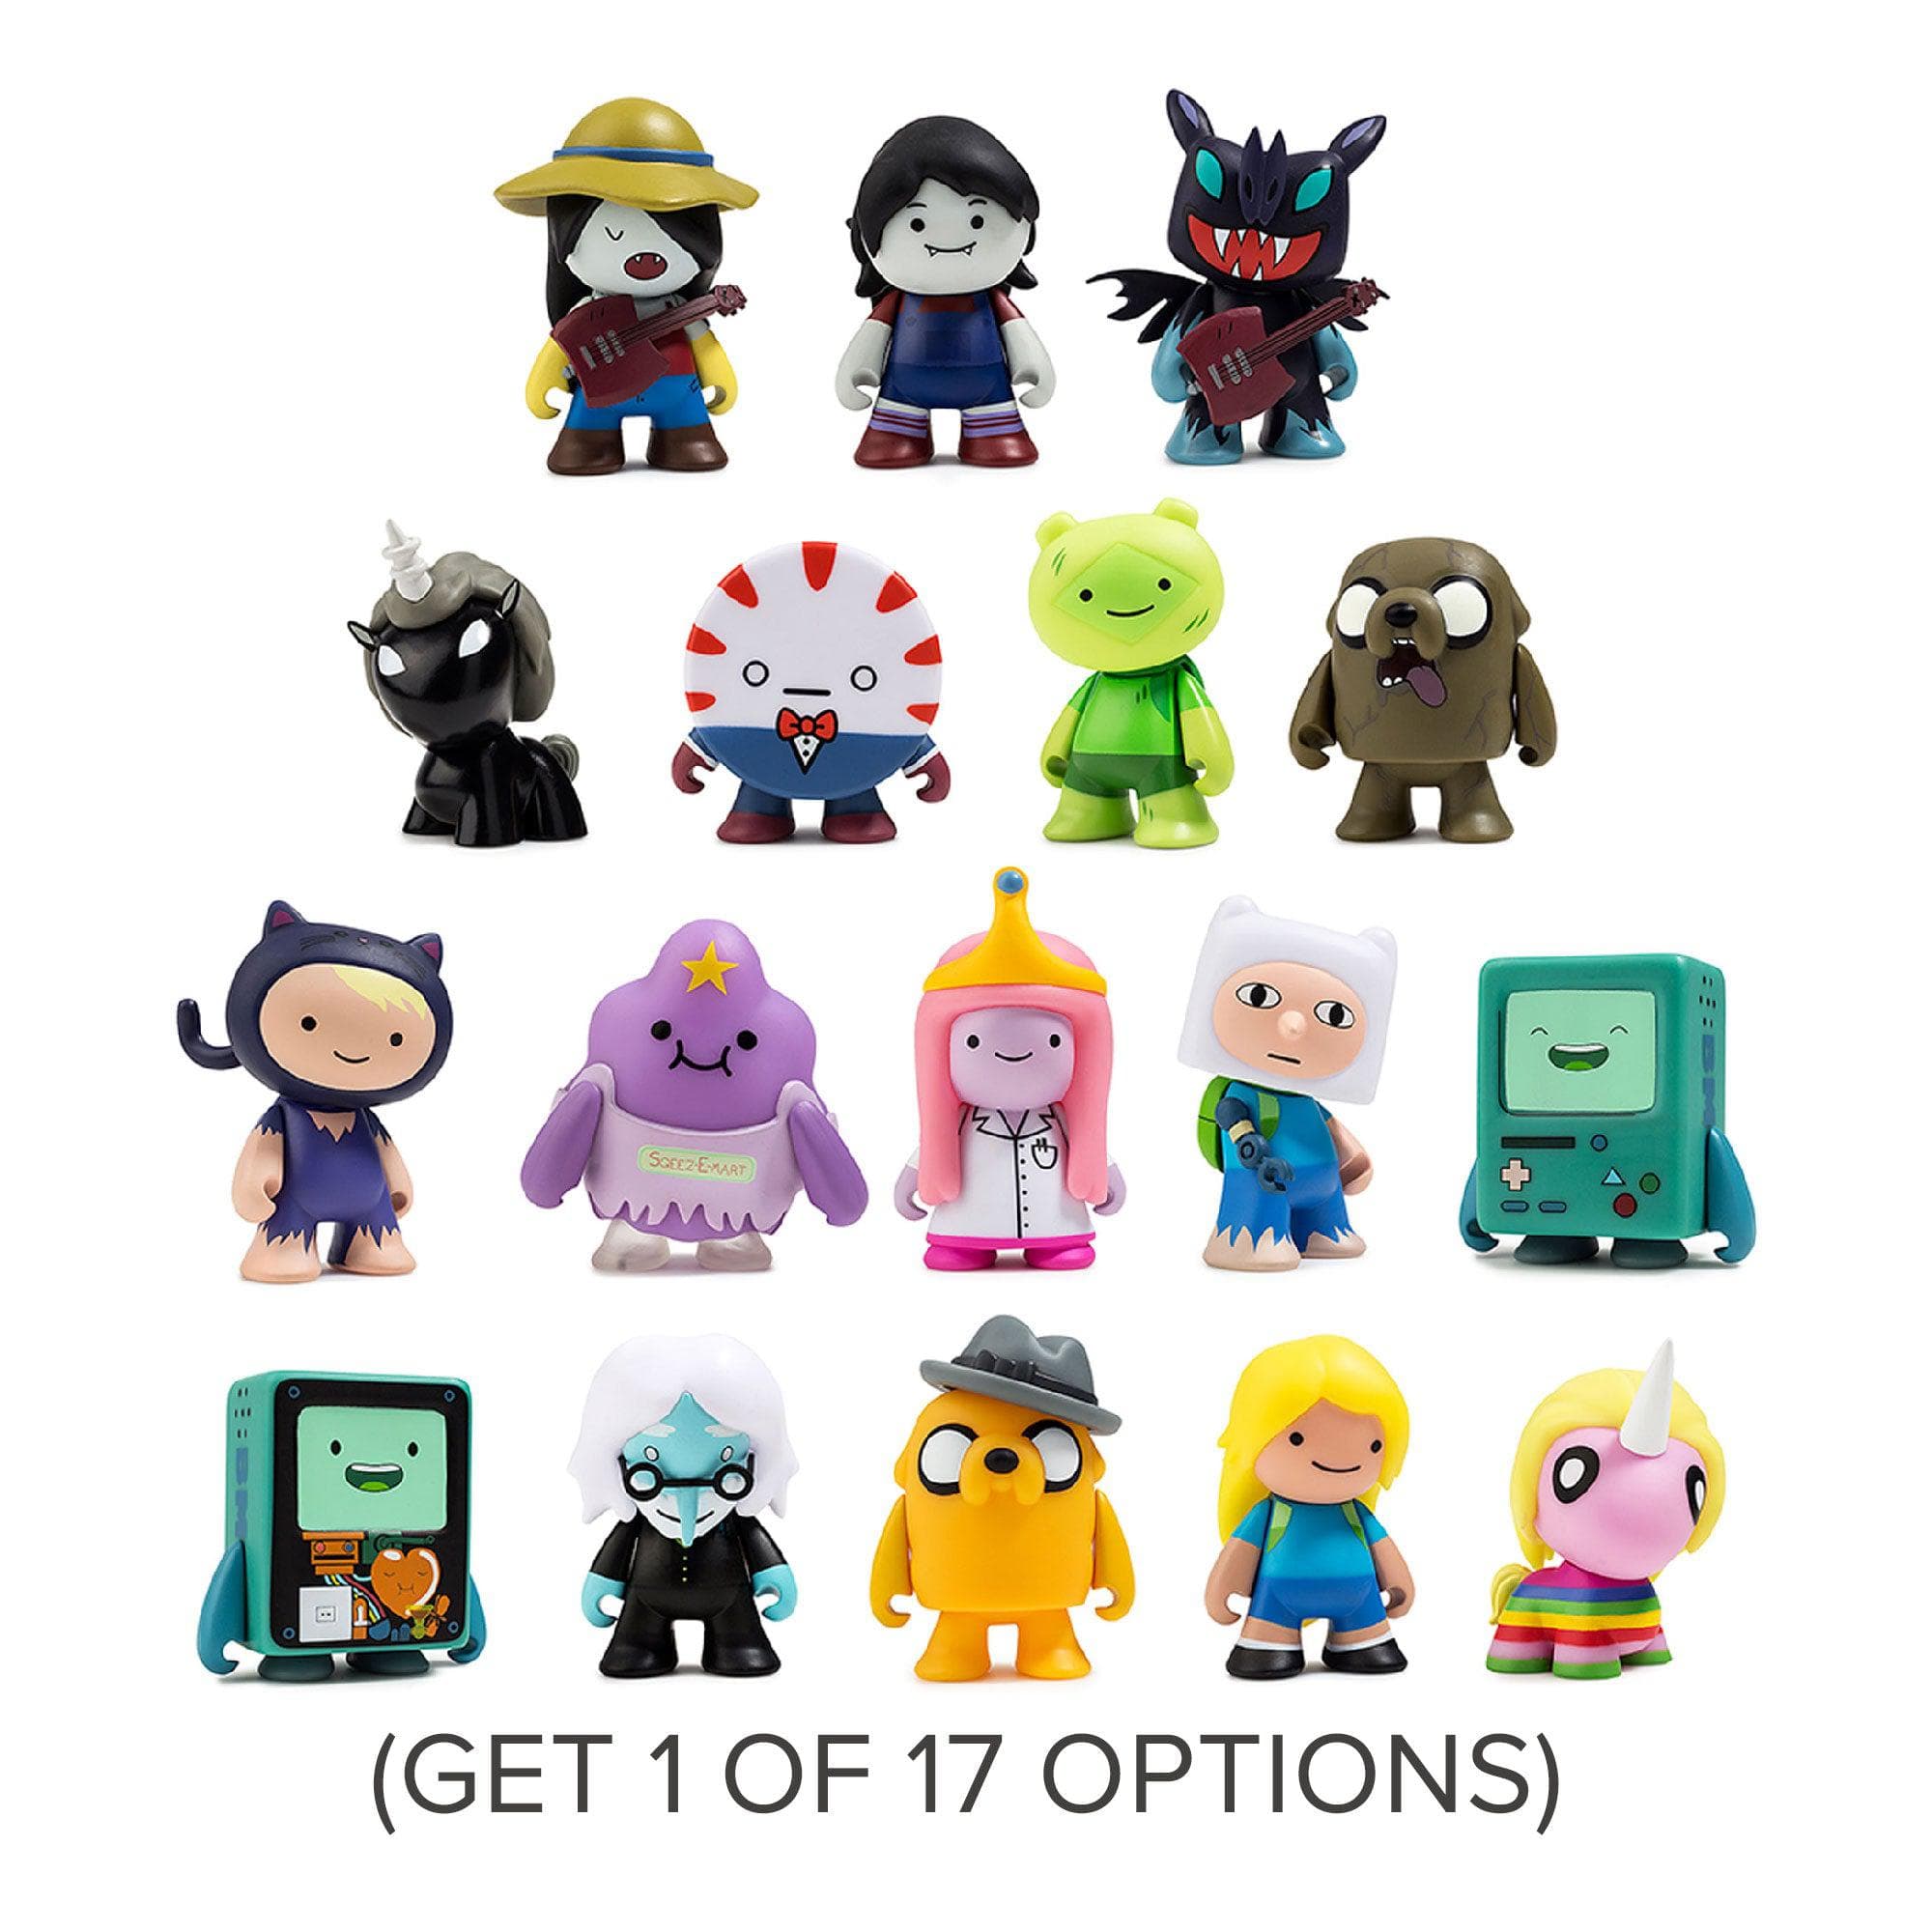 Adventure Time Fresh 2 Death Collectible Figures - Single Blind Box - costumes.com